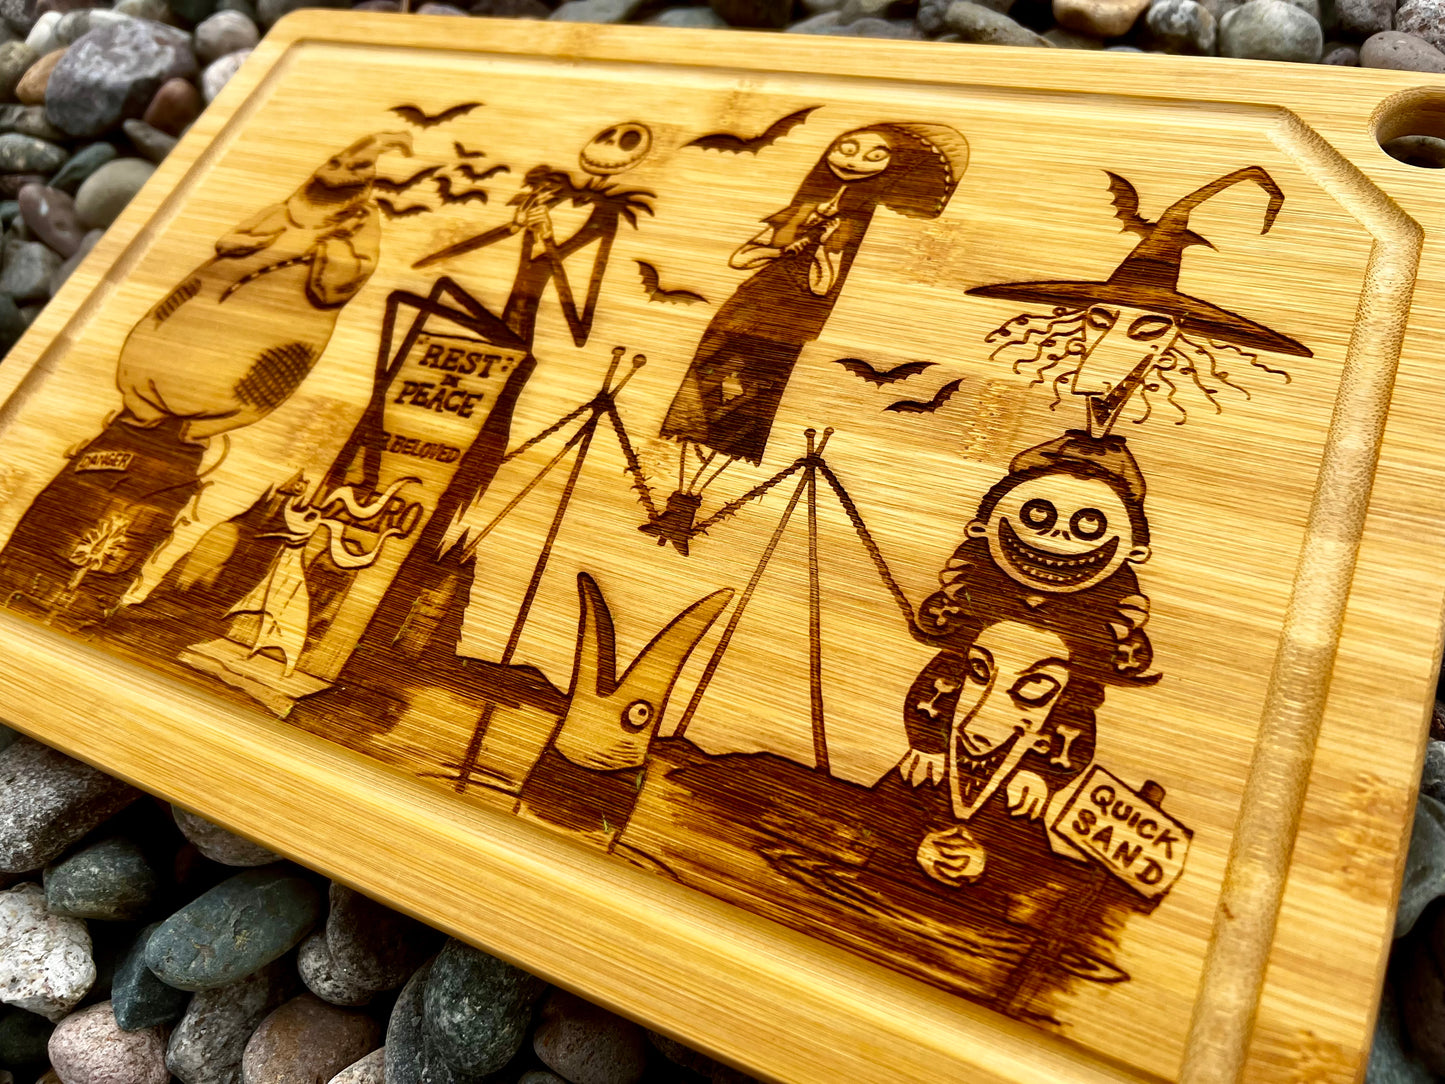 Cutting / Charcuterie Board - Nightmare Before Christmas Haunted Mansion Mash Up